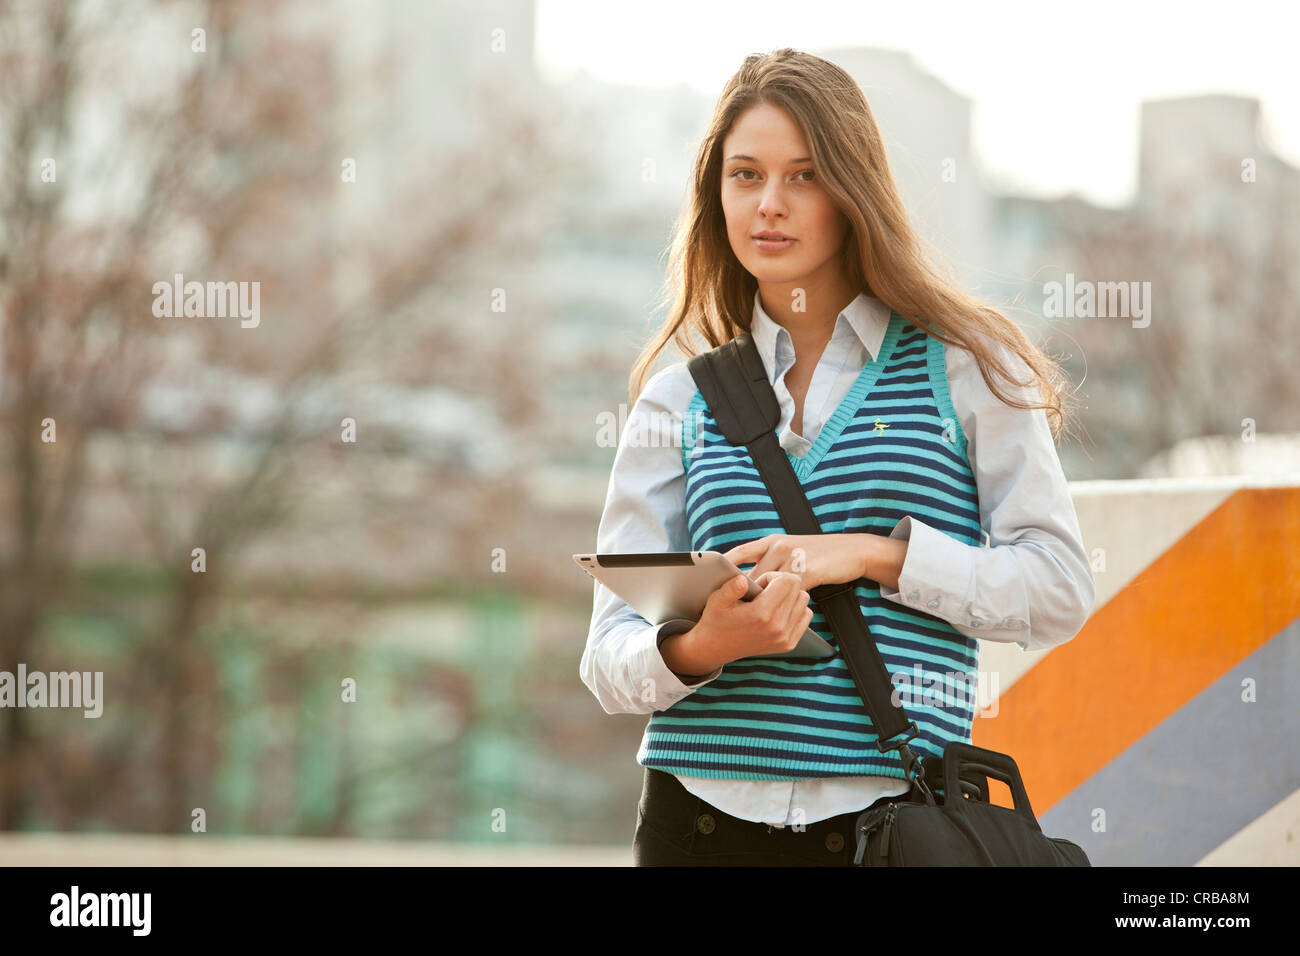 Student on the move with a tablet PC and a shoulder bag Stock Photo